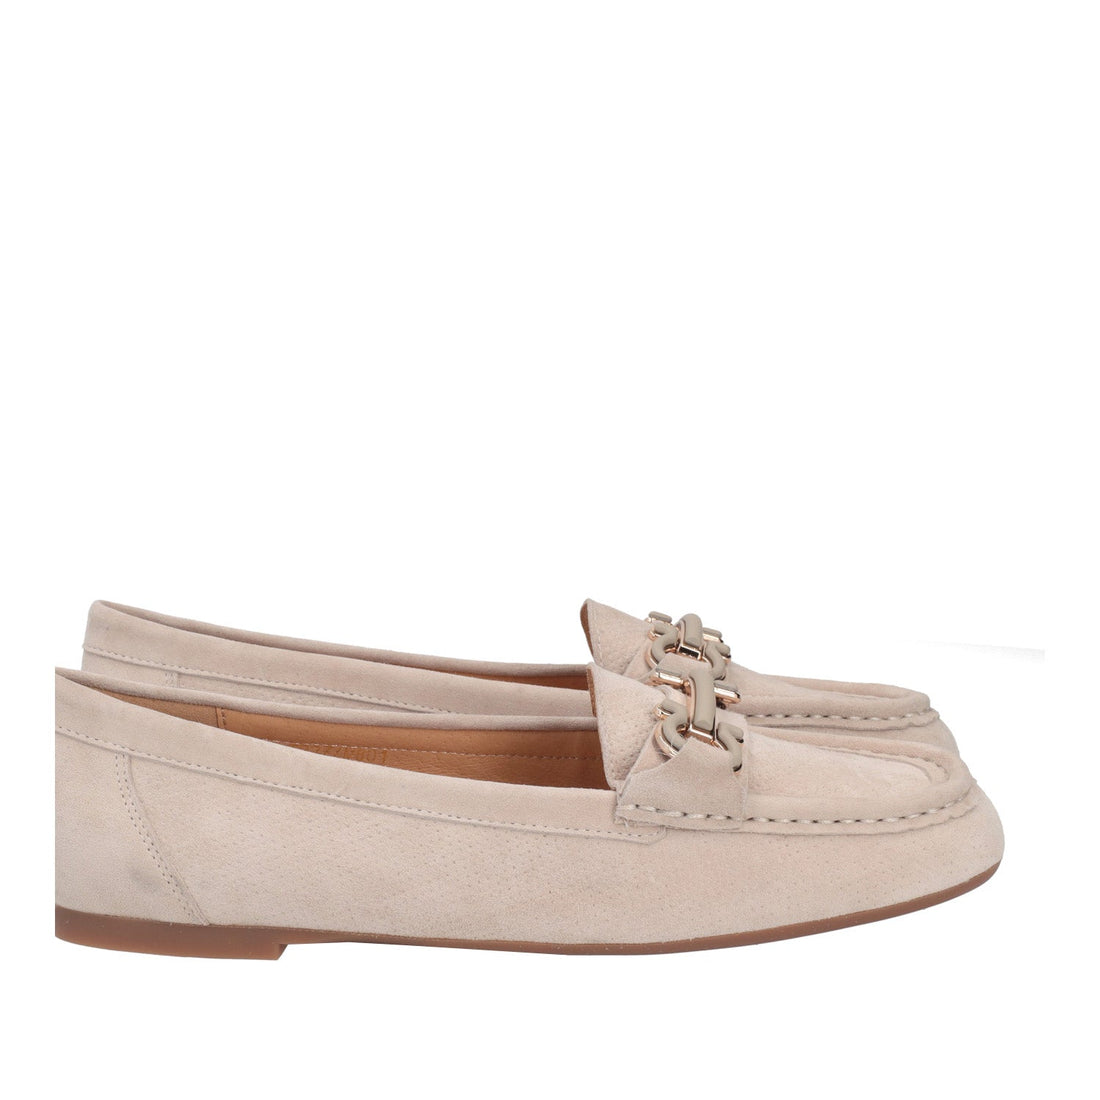 BEIGE CARMEN MOCCASIN IN PERFORATED LEATHER